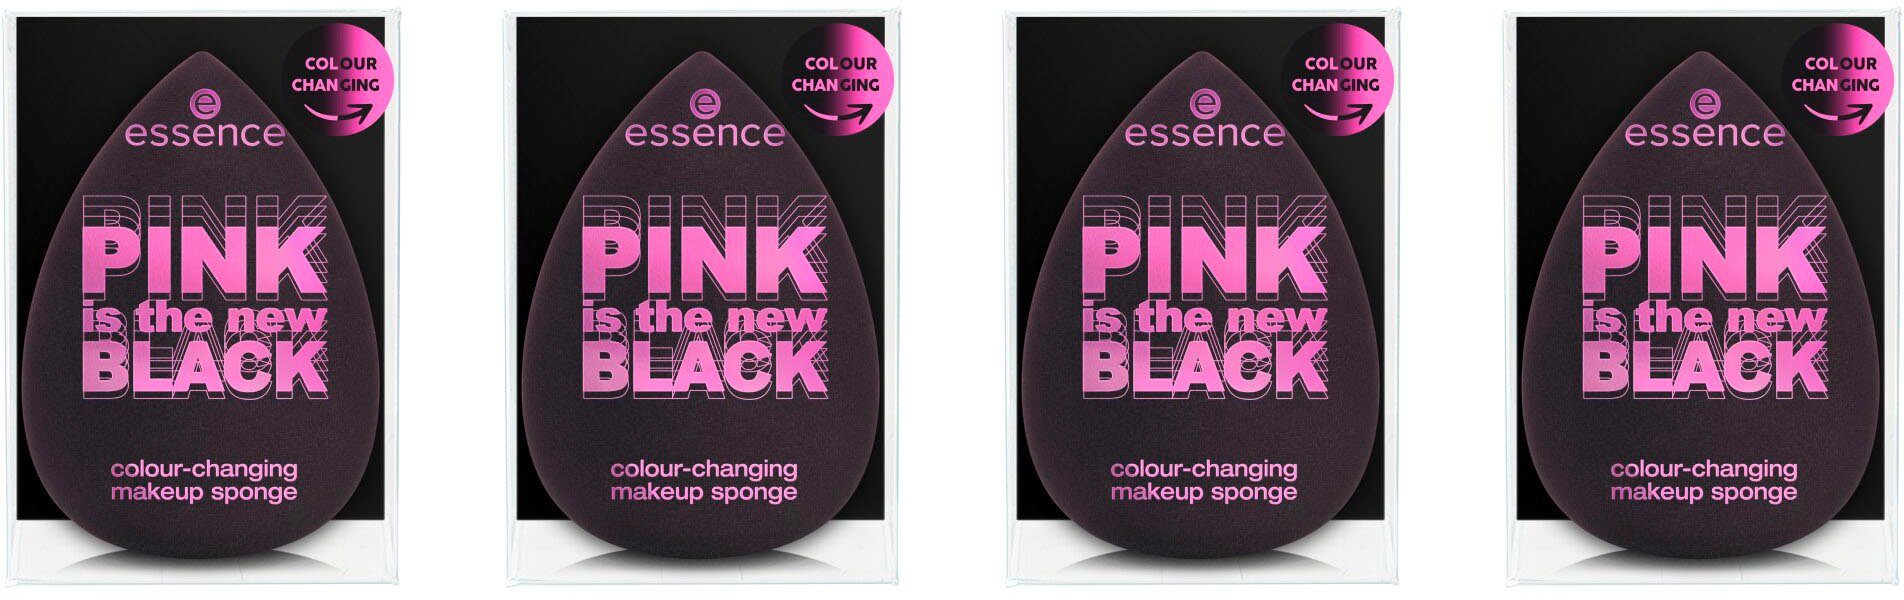 sponge, Make-up the colour-changing BLACK makeup is Schwamm Essence Colour-changing PINK new